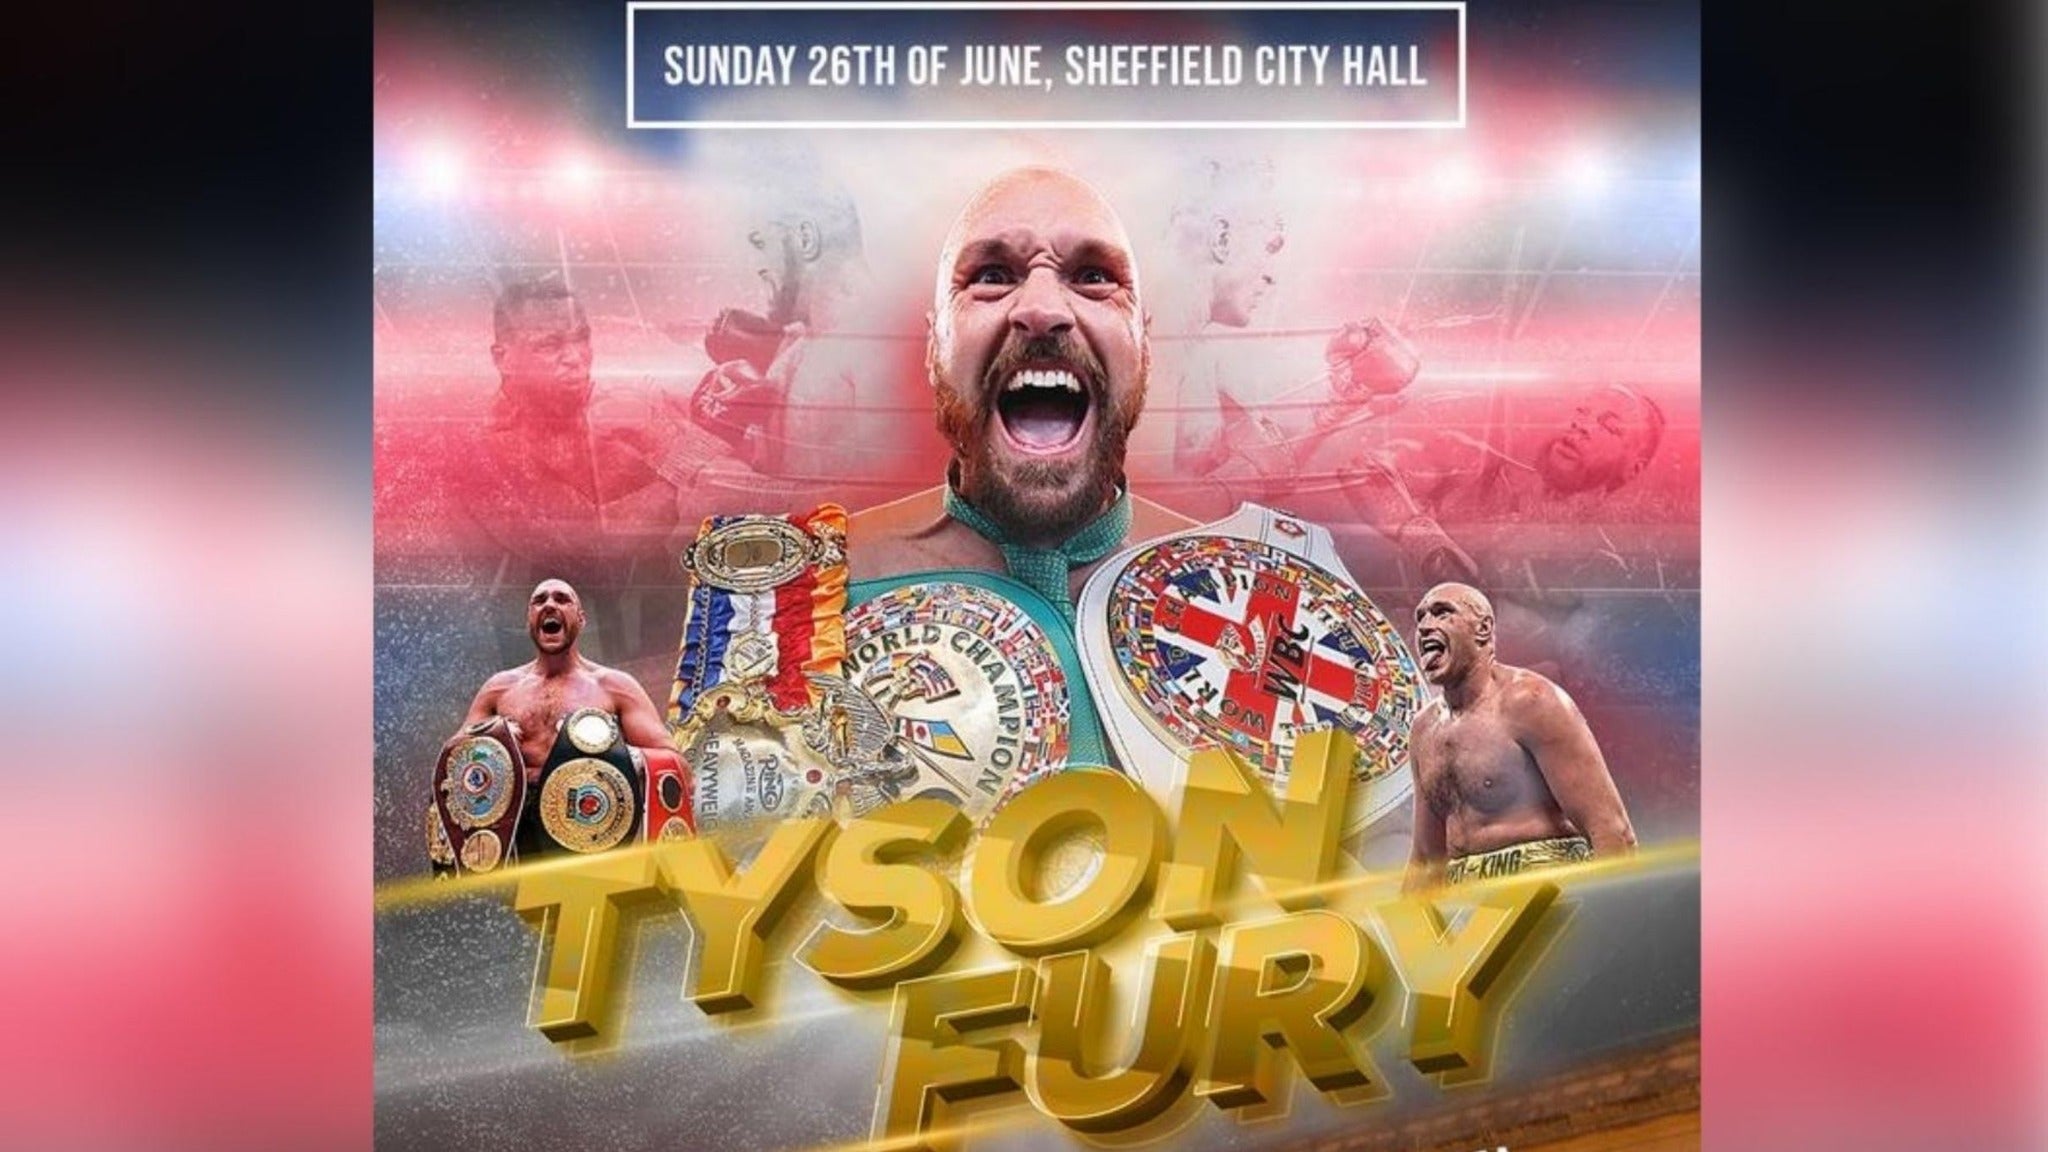 Fury Fest - The OFFICIAL World Champion After Party Tour